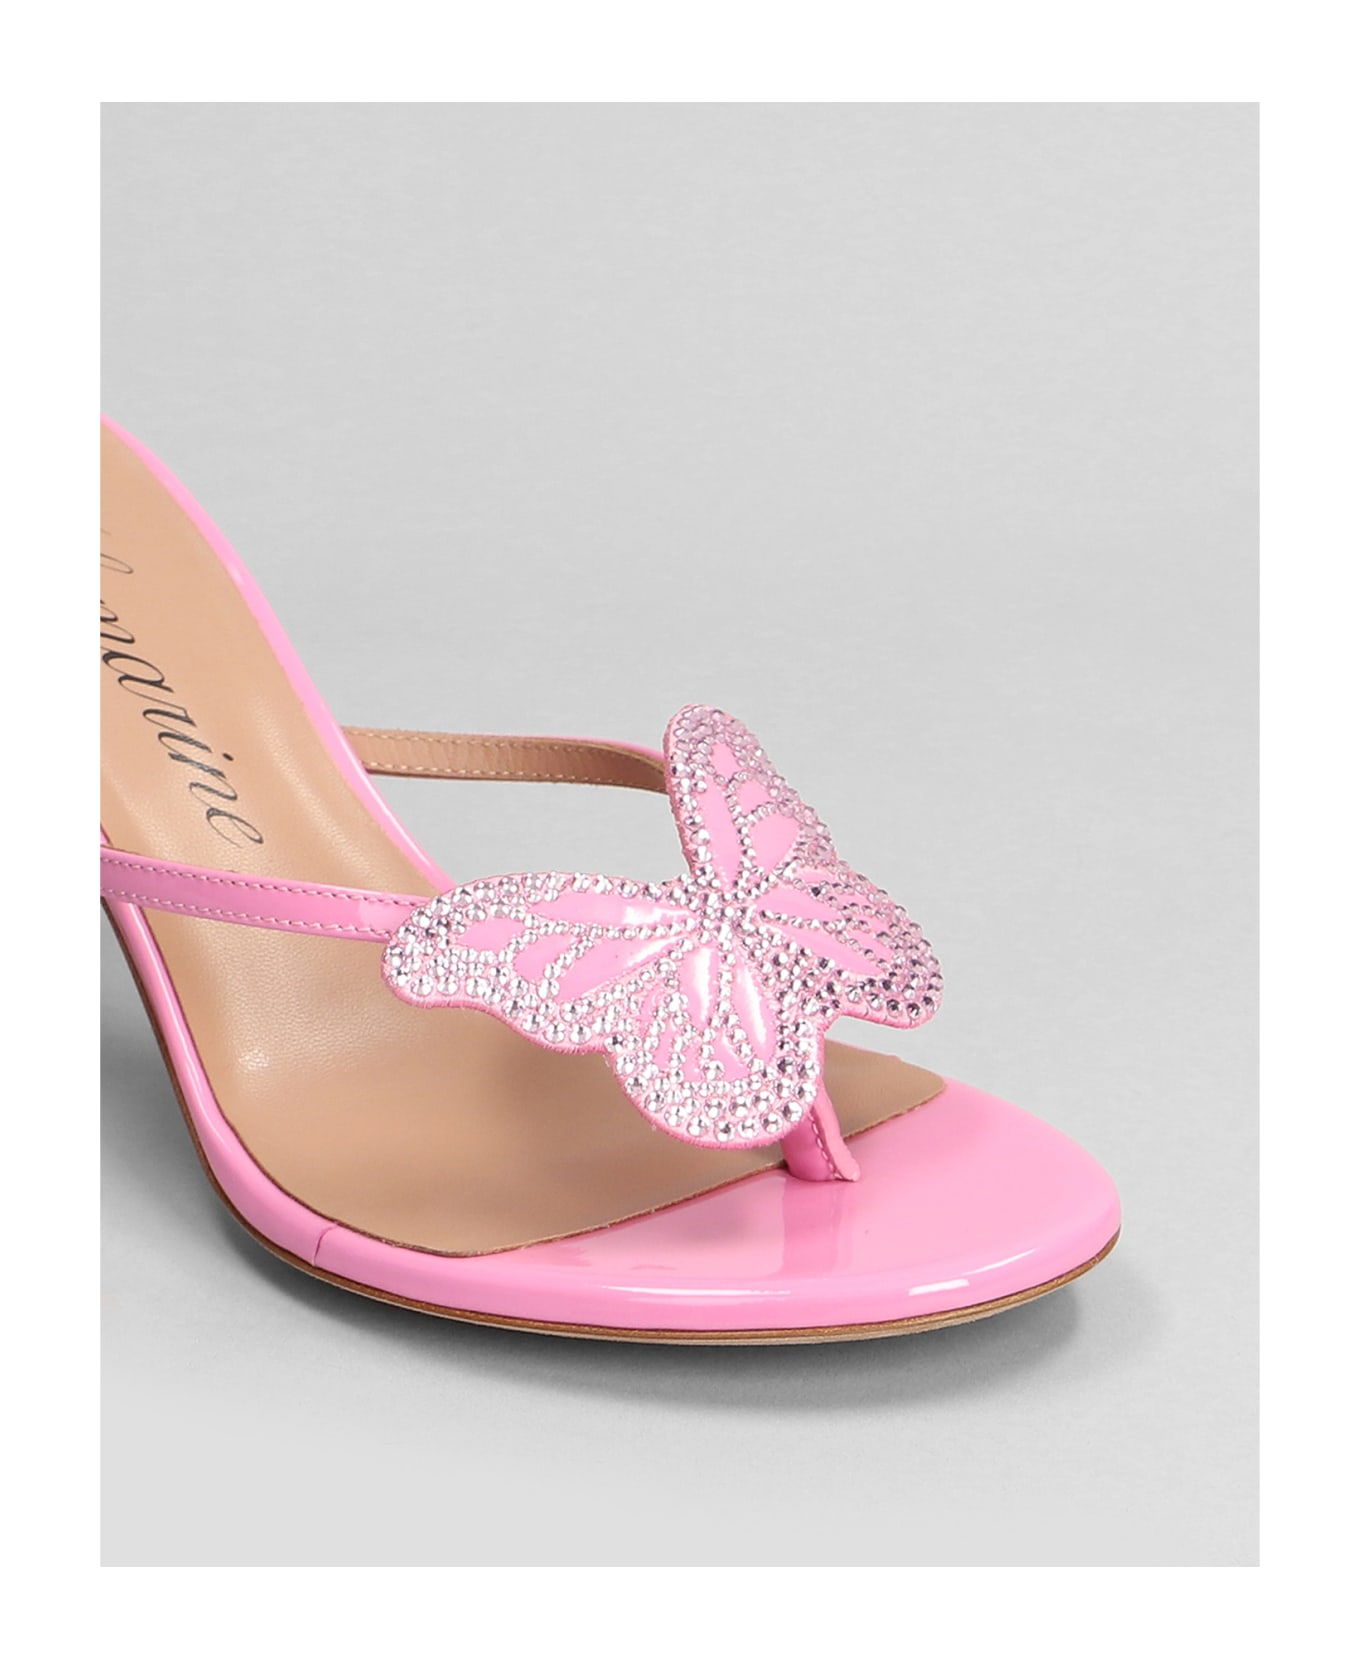 Blumarine Butterfly Slipper-mule In Rose-pink Patent Leather - rose-pink サンダル